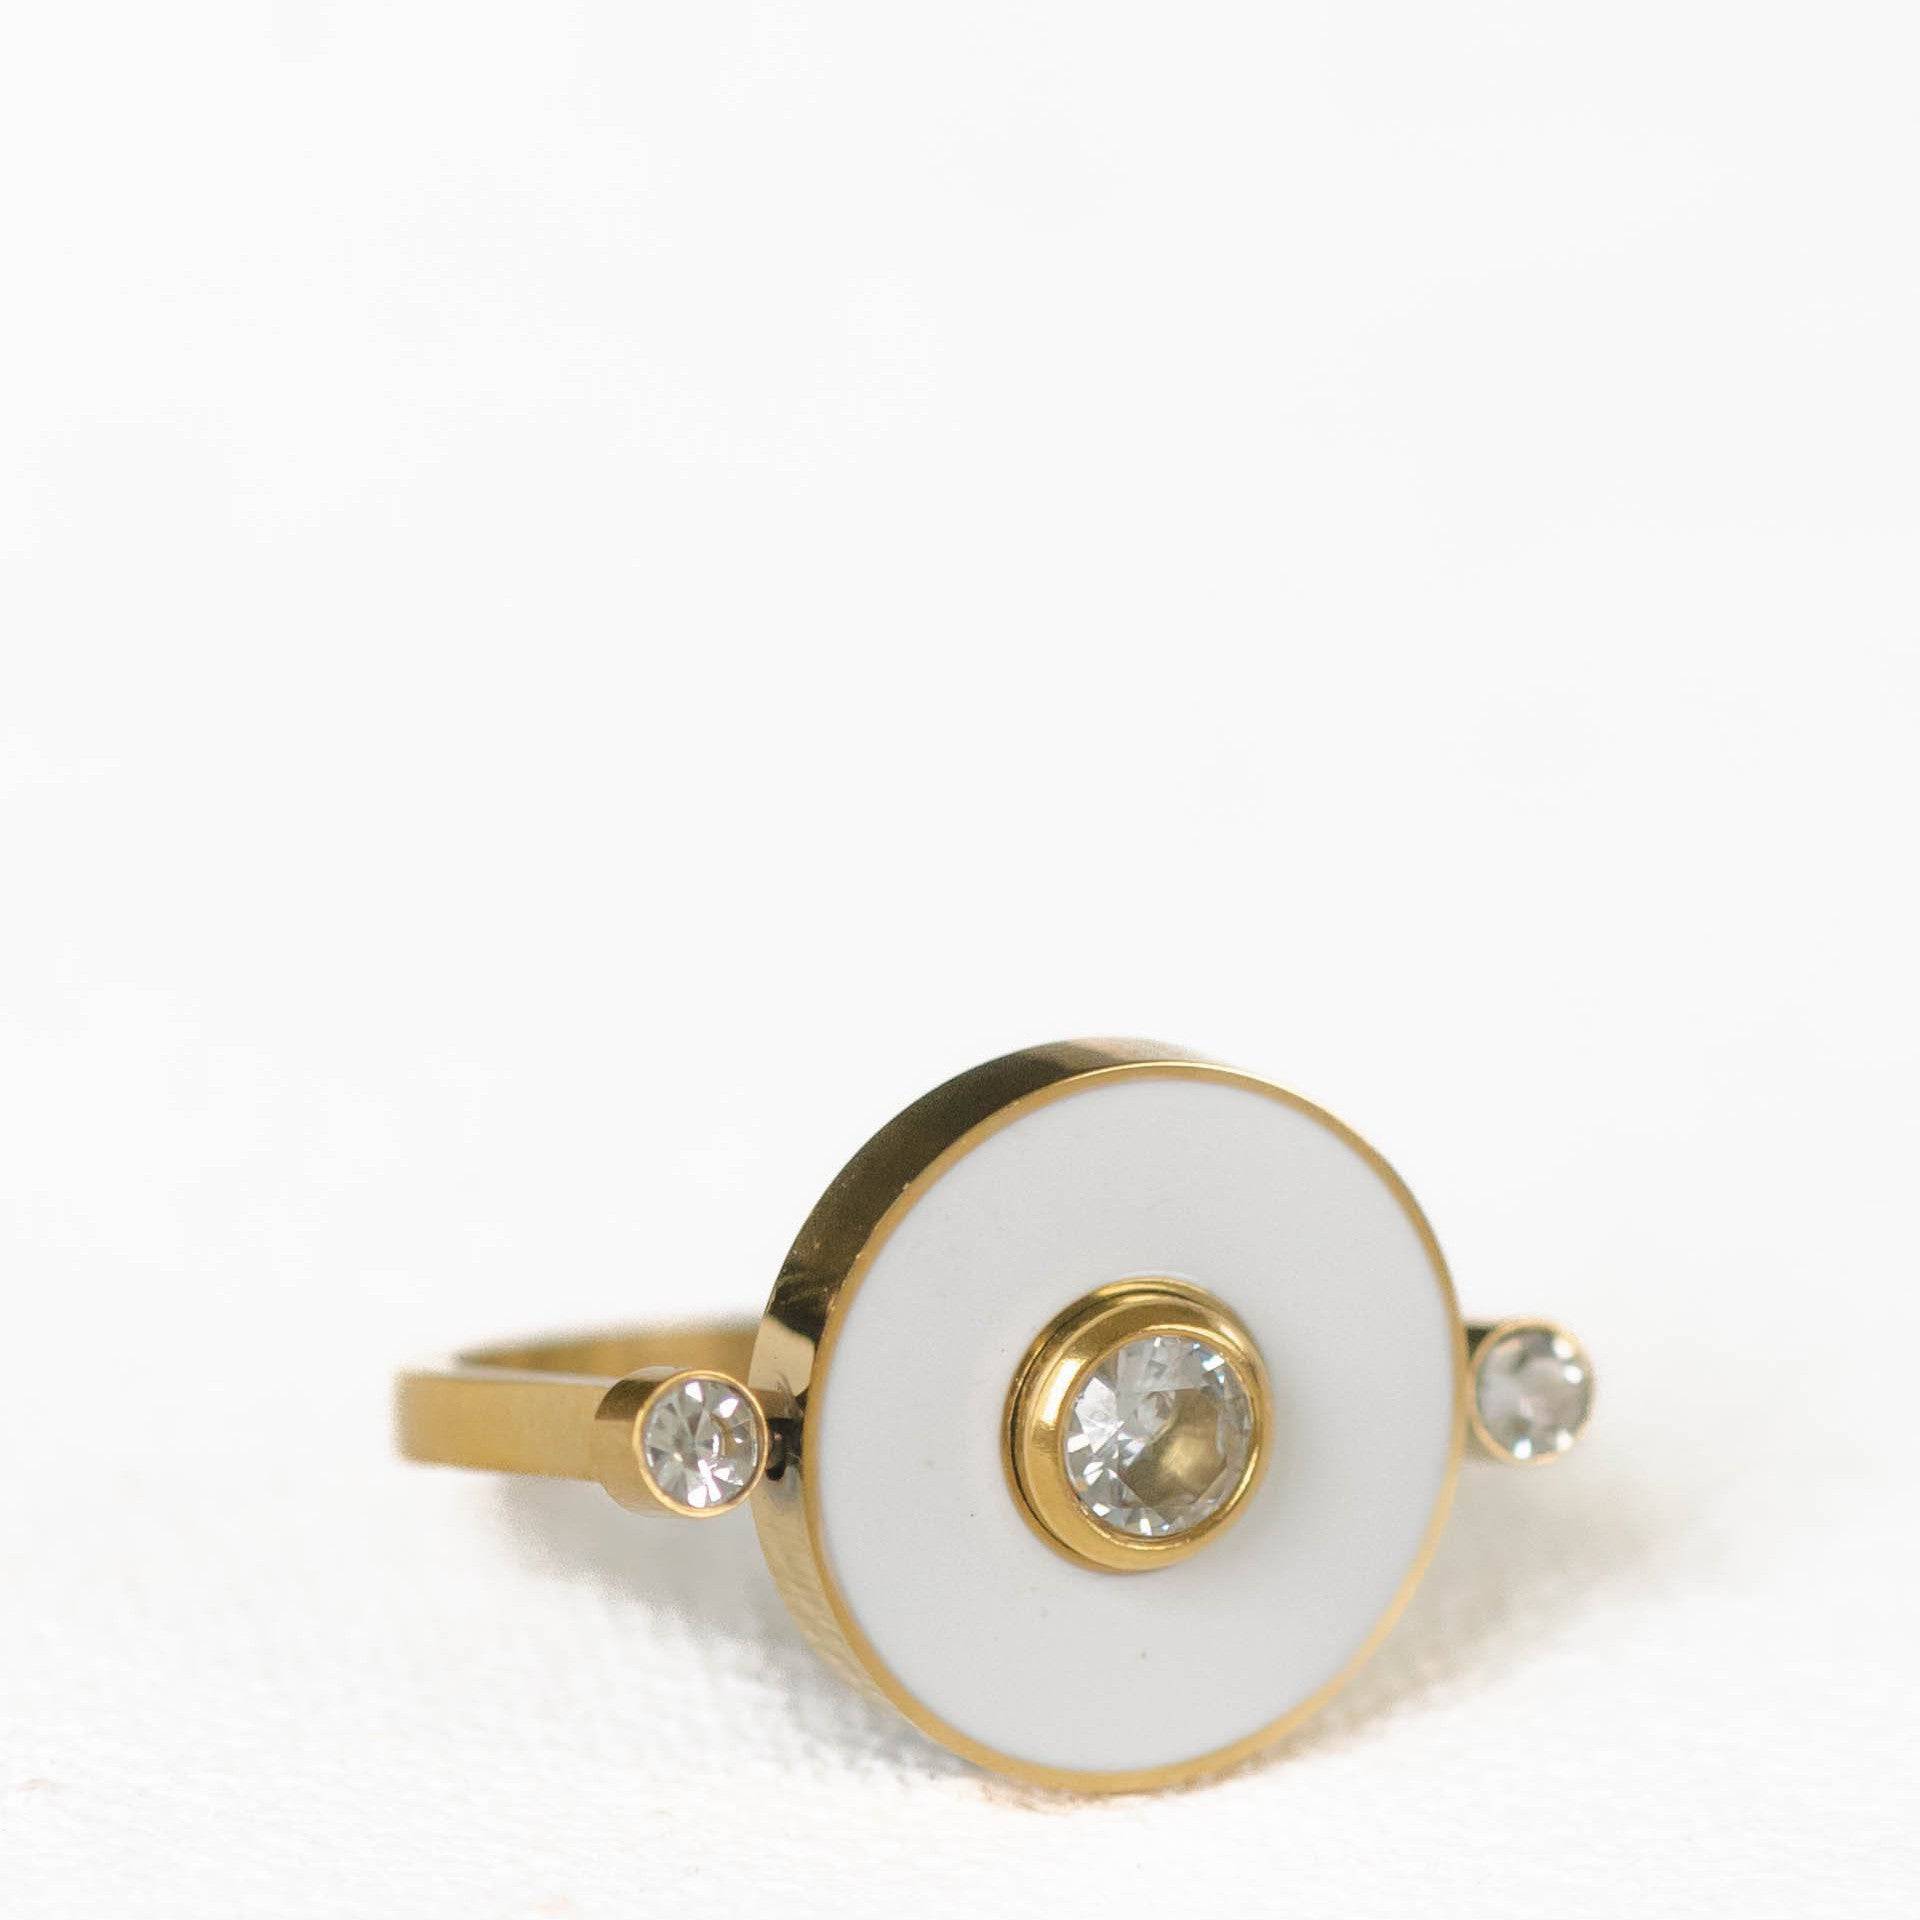 Axel Enamel Double-Sided Ring - AMD COLLECTIVE